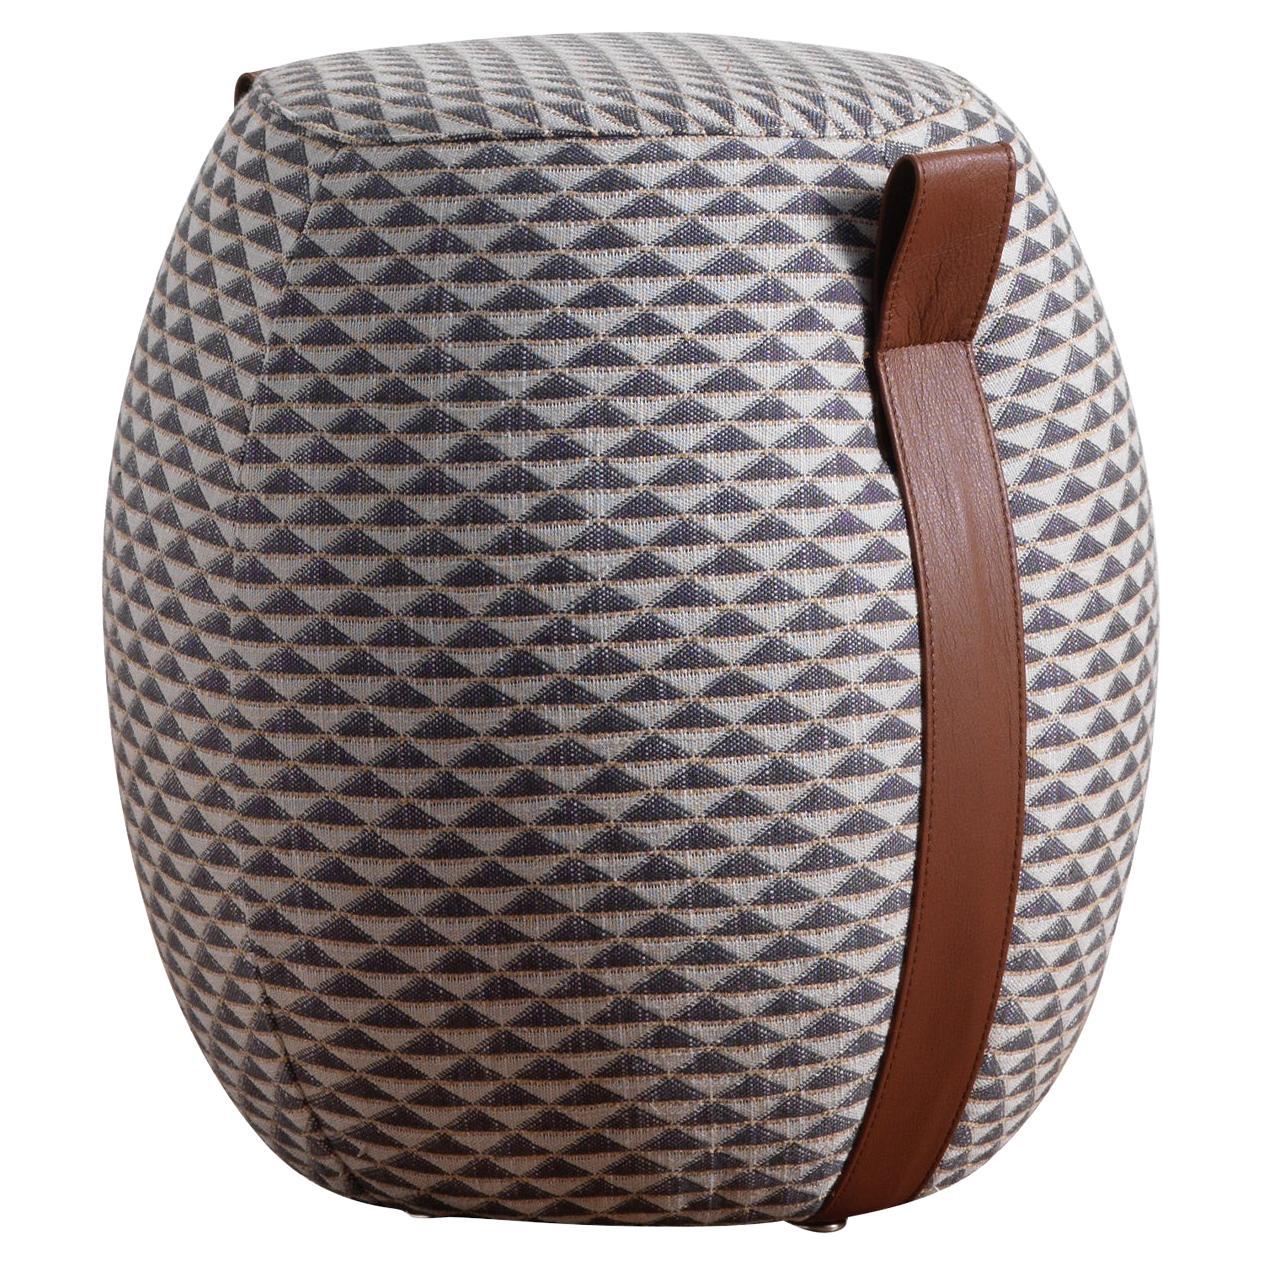 Domino Fabric and Leather Pouf MODO10 Collection